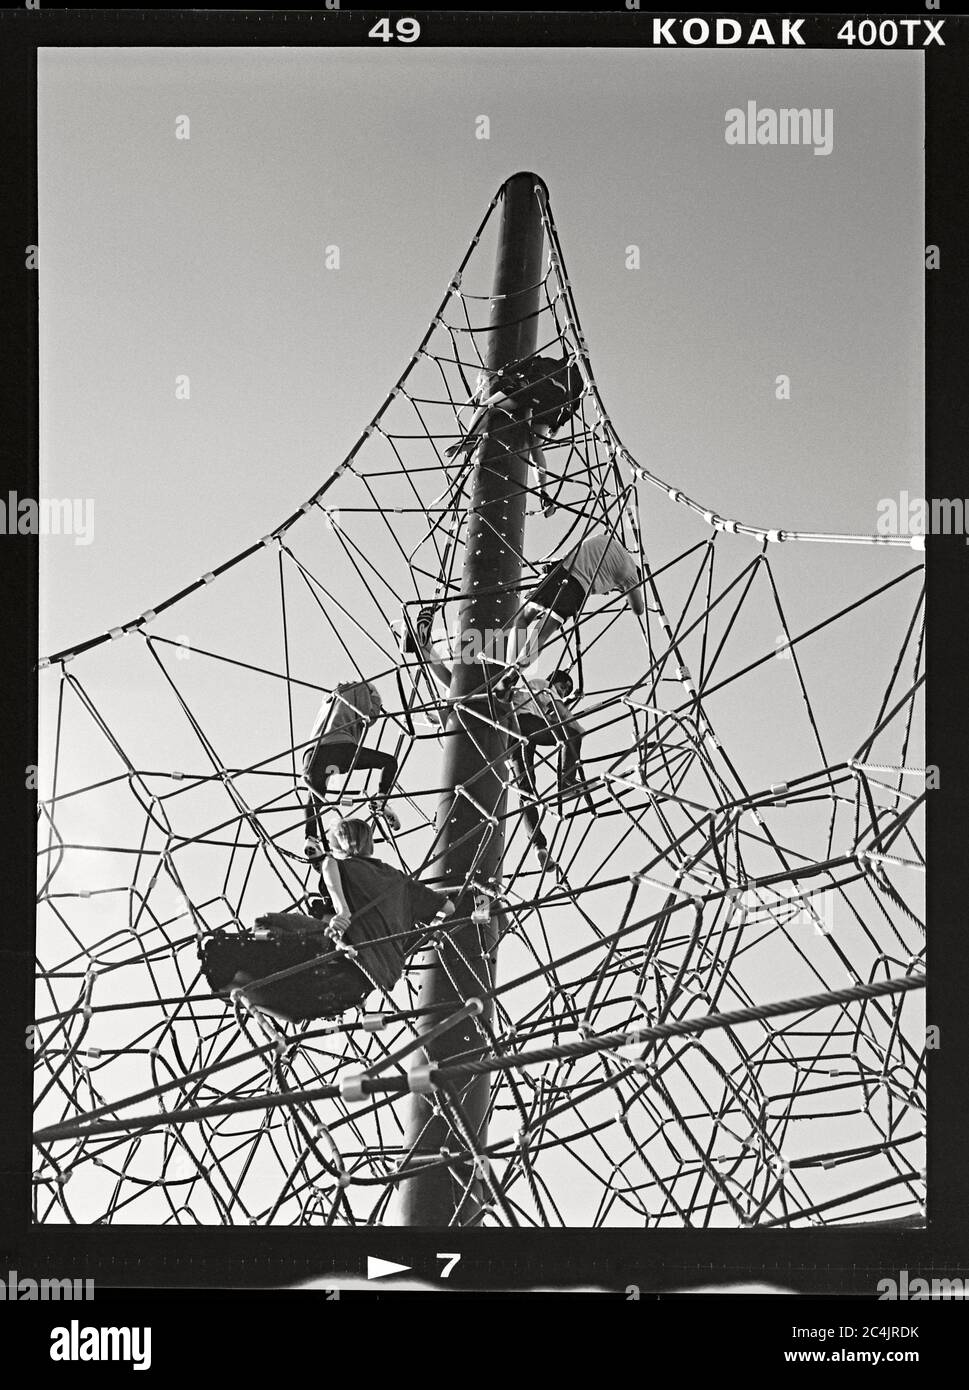 Kids climbing a tower made of rope on a park playground. Riverview Park, Mesa, Arizona.  March 21, 2020. Image from 6x4.5 cm negative. Stock Photo